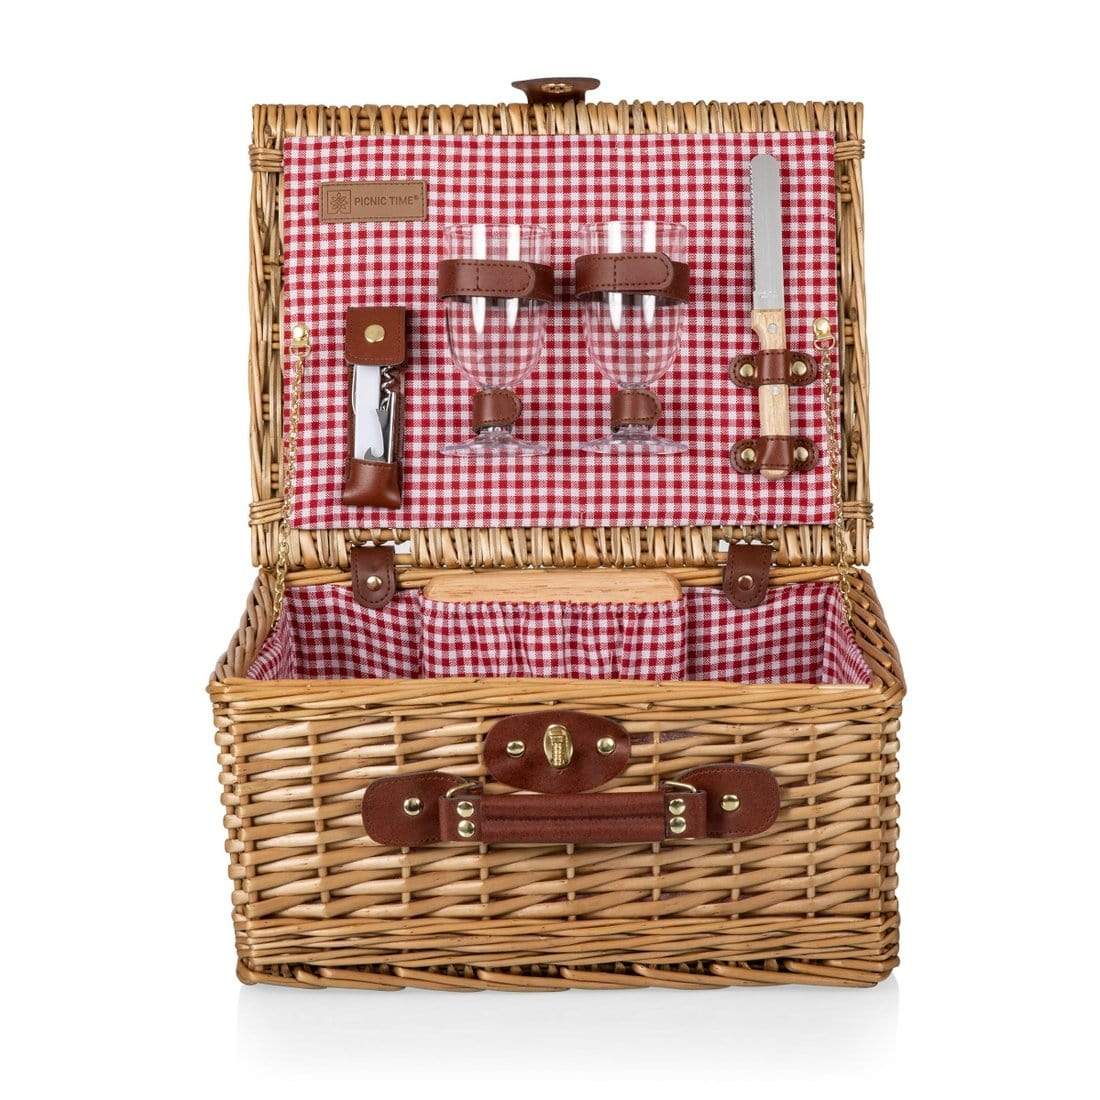  Classic Wine and Cheese Basket Inspired Atelier Perfumarie